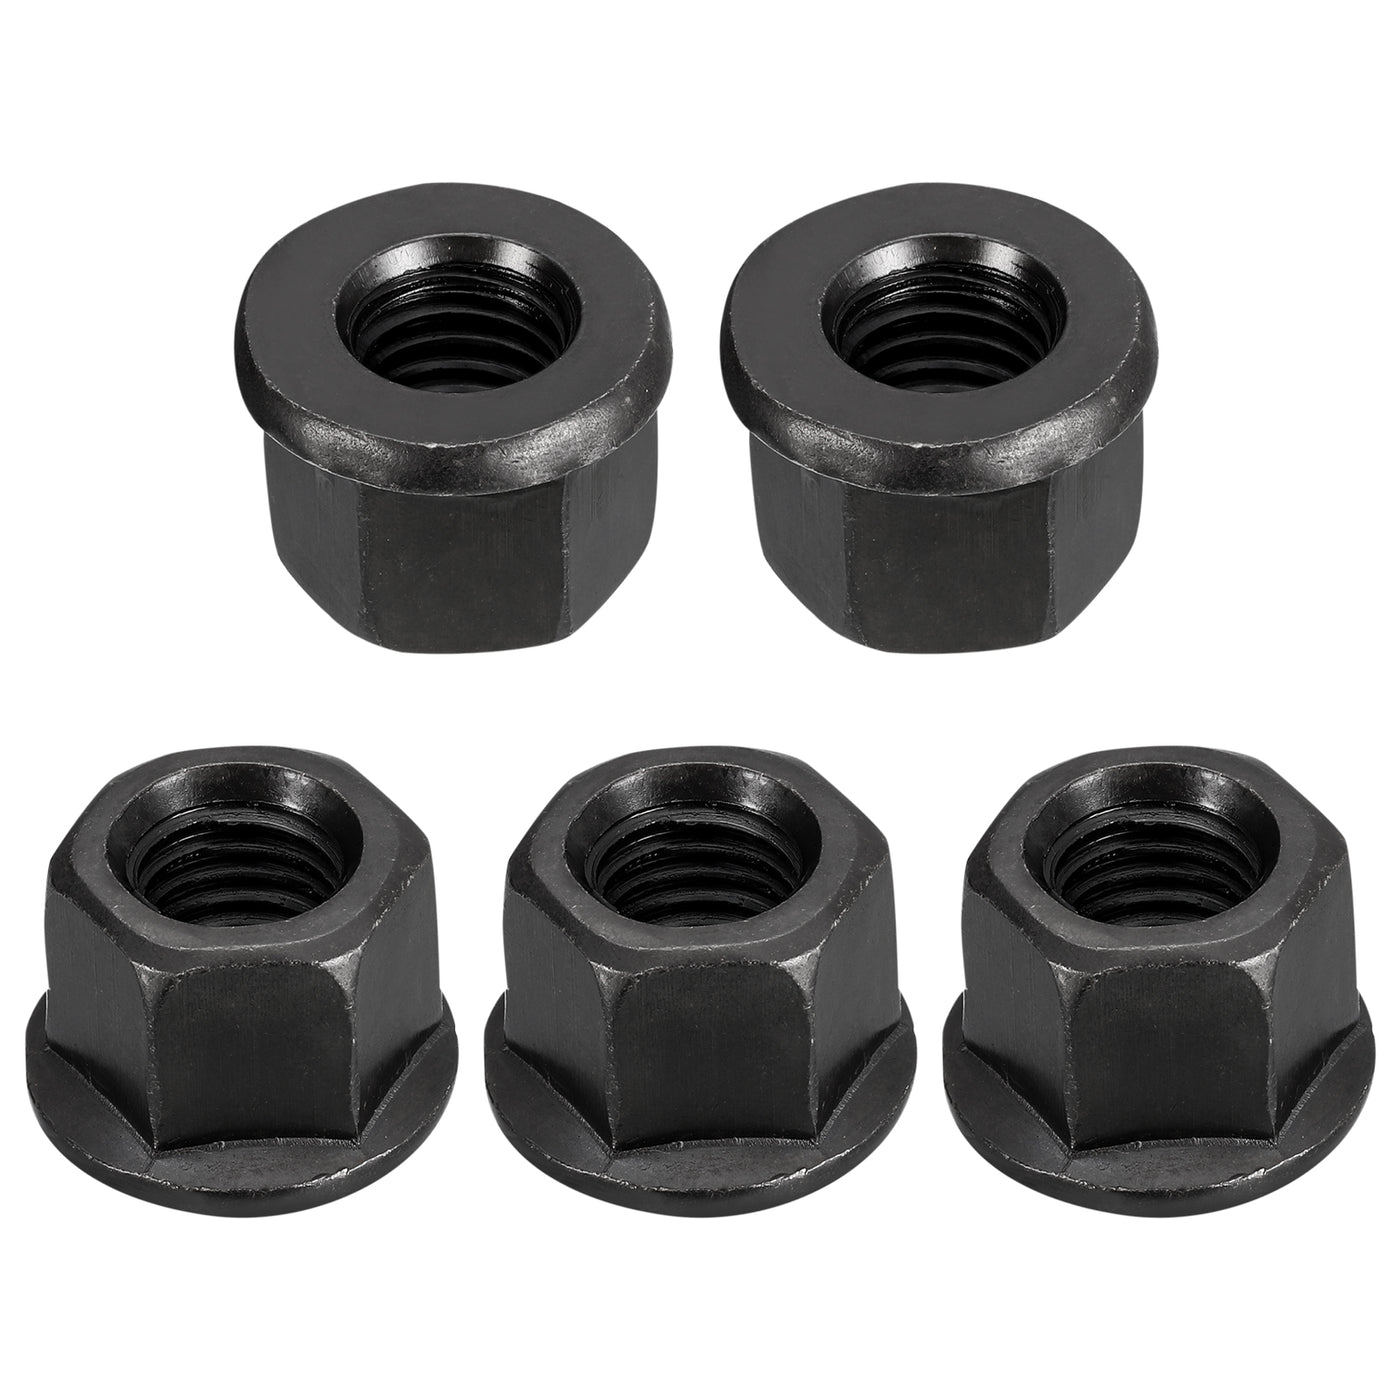 uxcell Uxcell M14 Flange Hex Lock Nuts, 5pcs Grade 10.9 Carbon Steel Hex Flange Nuts